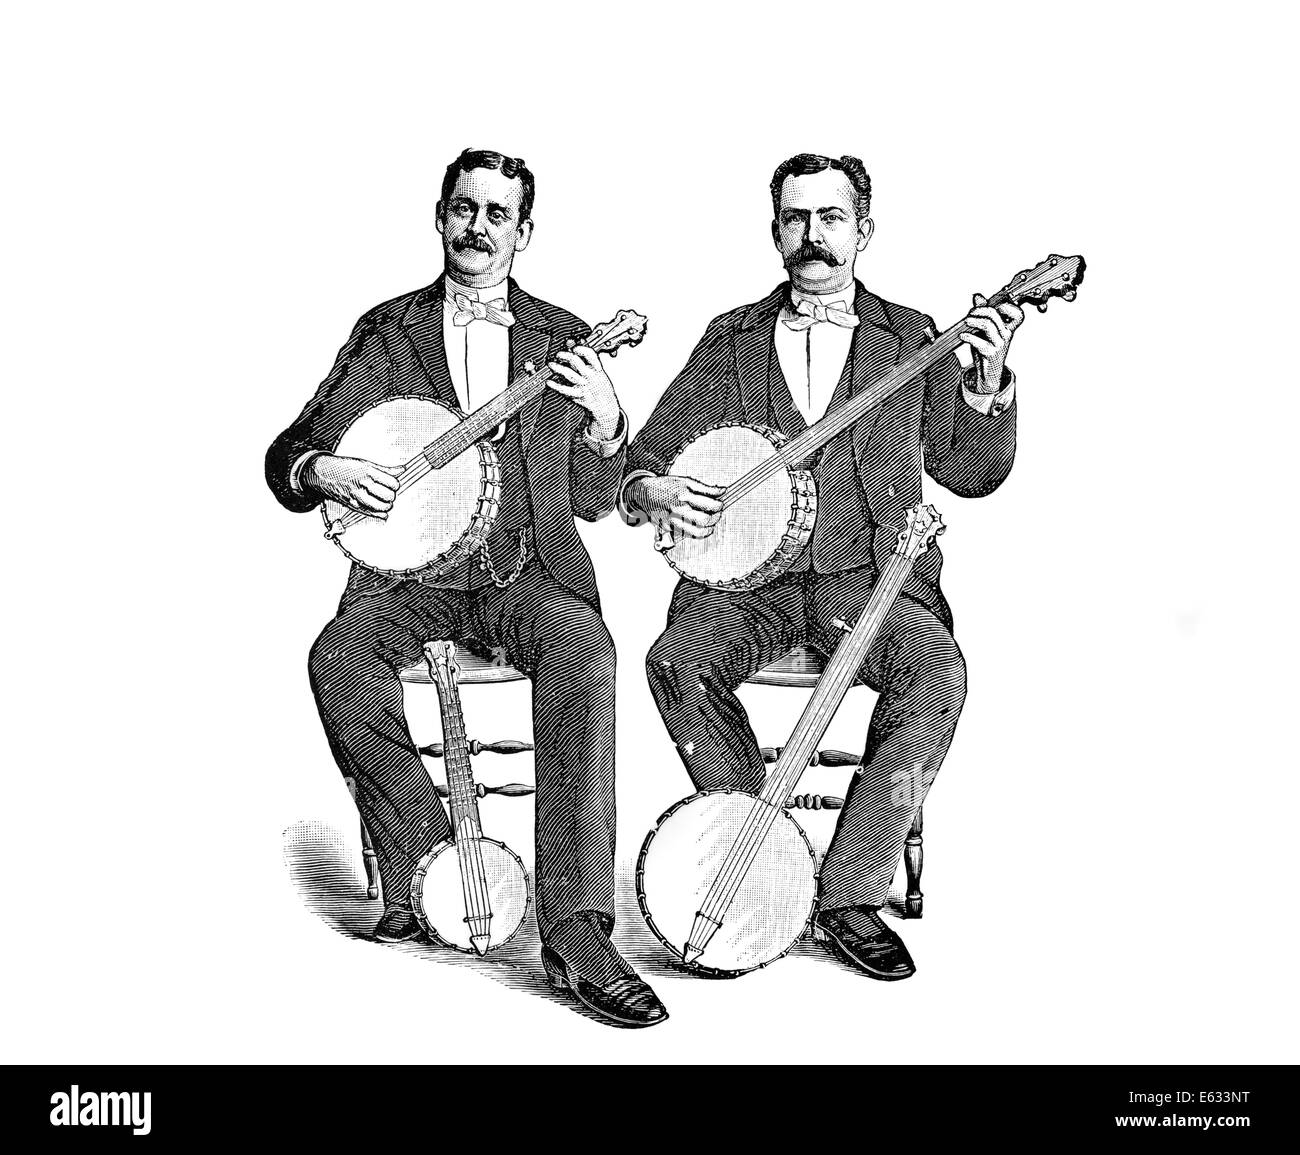 1880s 1890s TWO MEN PLAYING CLASSICAL STYLE FIVE STRING BANJOS SITTING SIDE BY SIDE LOOKING AT CAMERA Stock Photo